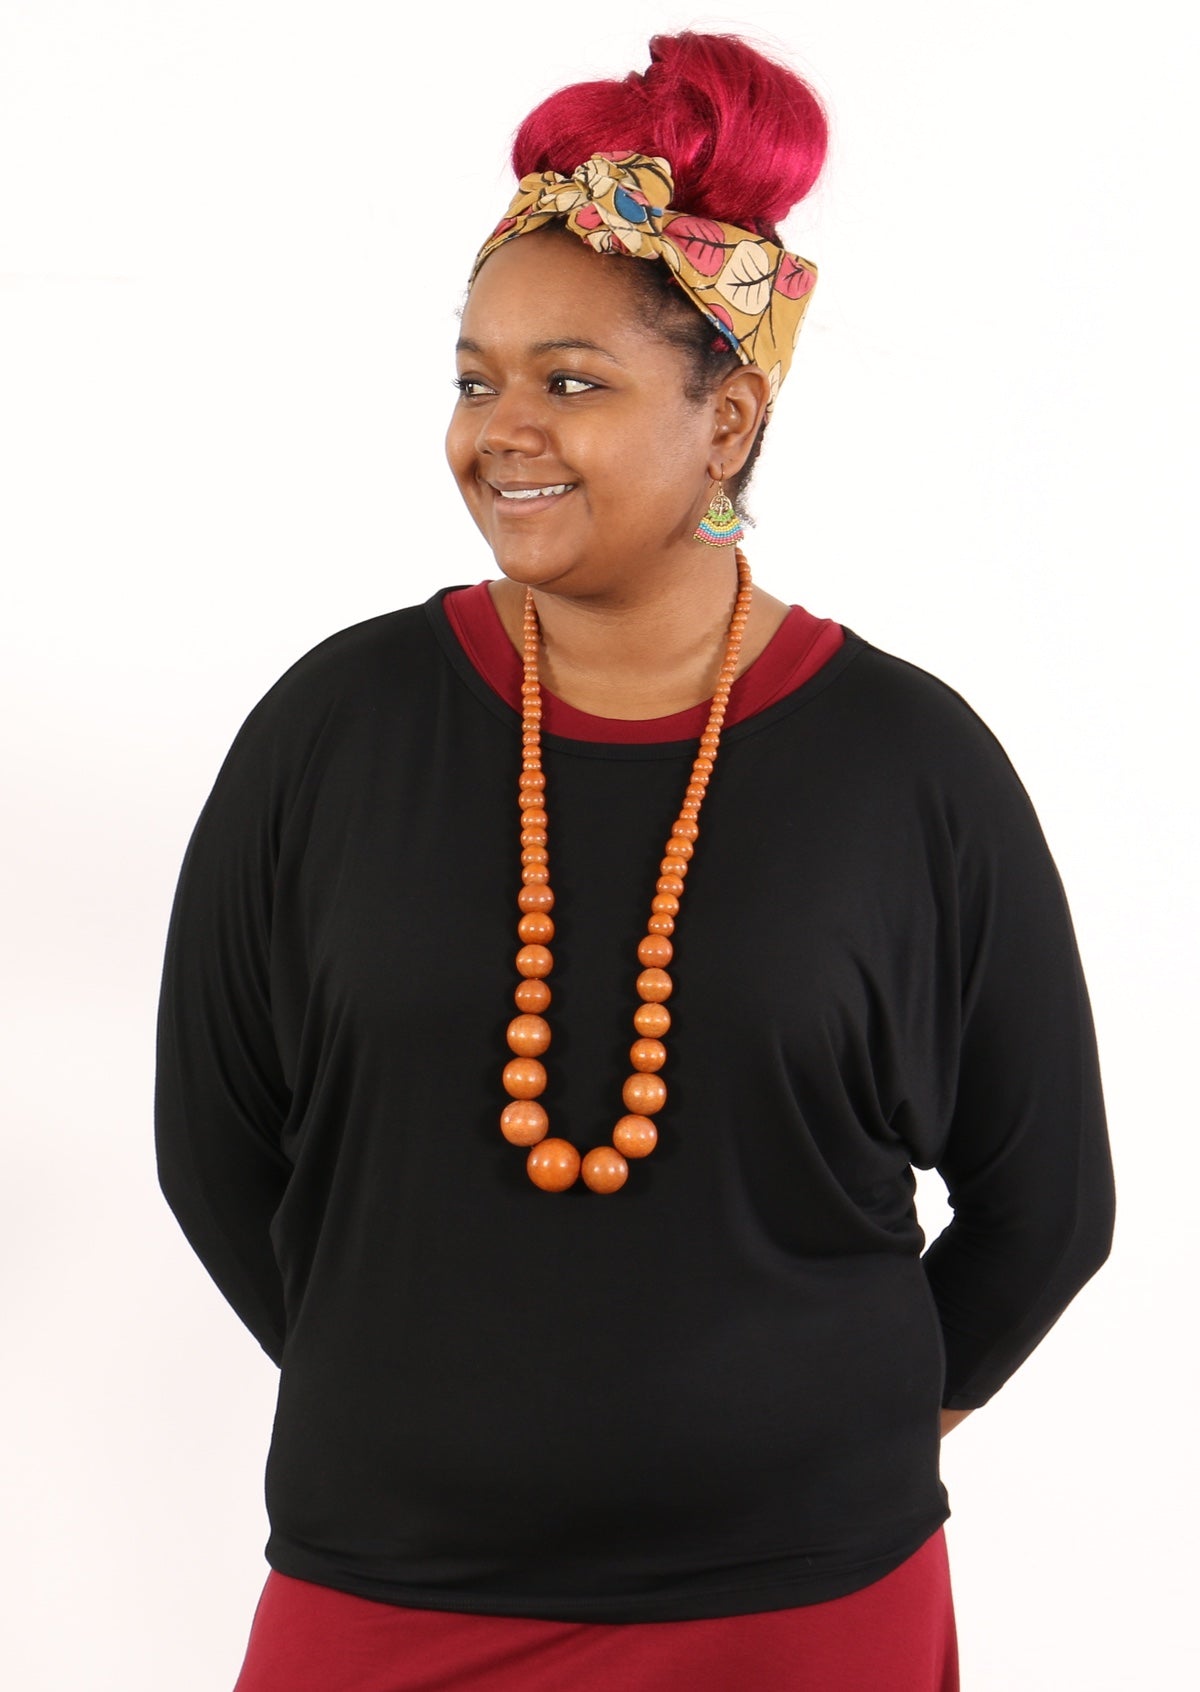 Woman wearing a 3/4 sleeve rayon batwing round neckline black top with orange beads and head scarf.